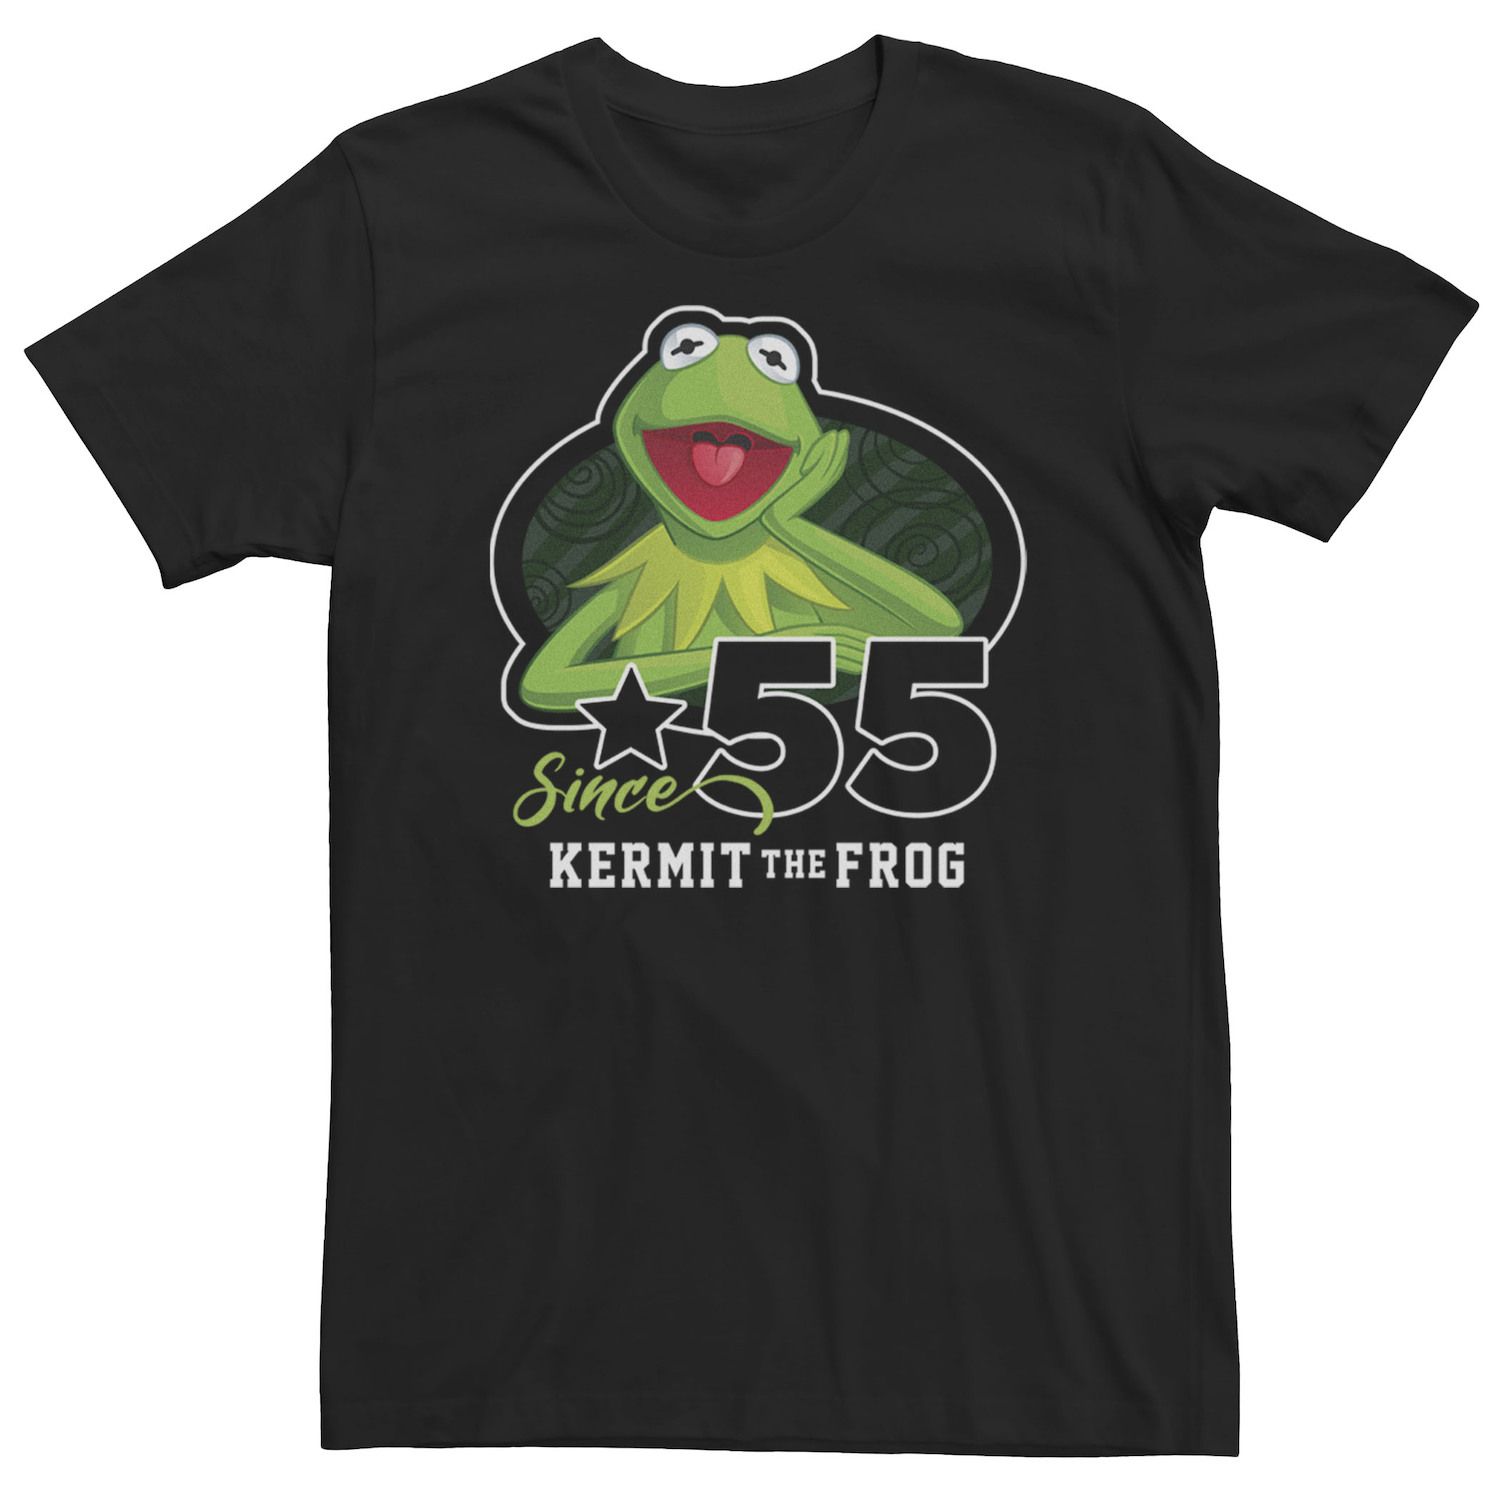 Image for Disney Big & Tall The Muppets Kermit The Frog Since '55 Portrait Tee at Kohl's.